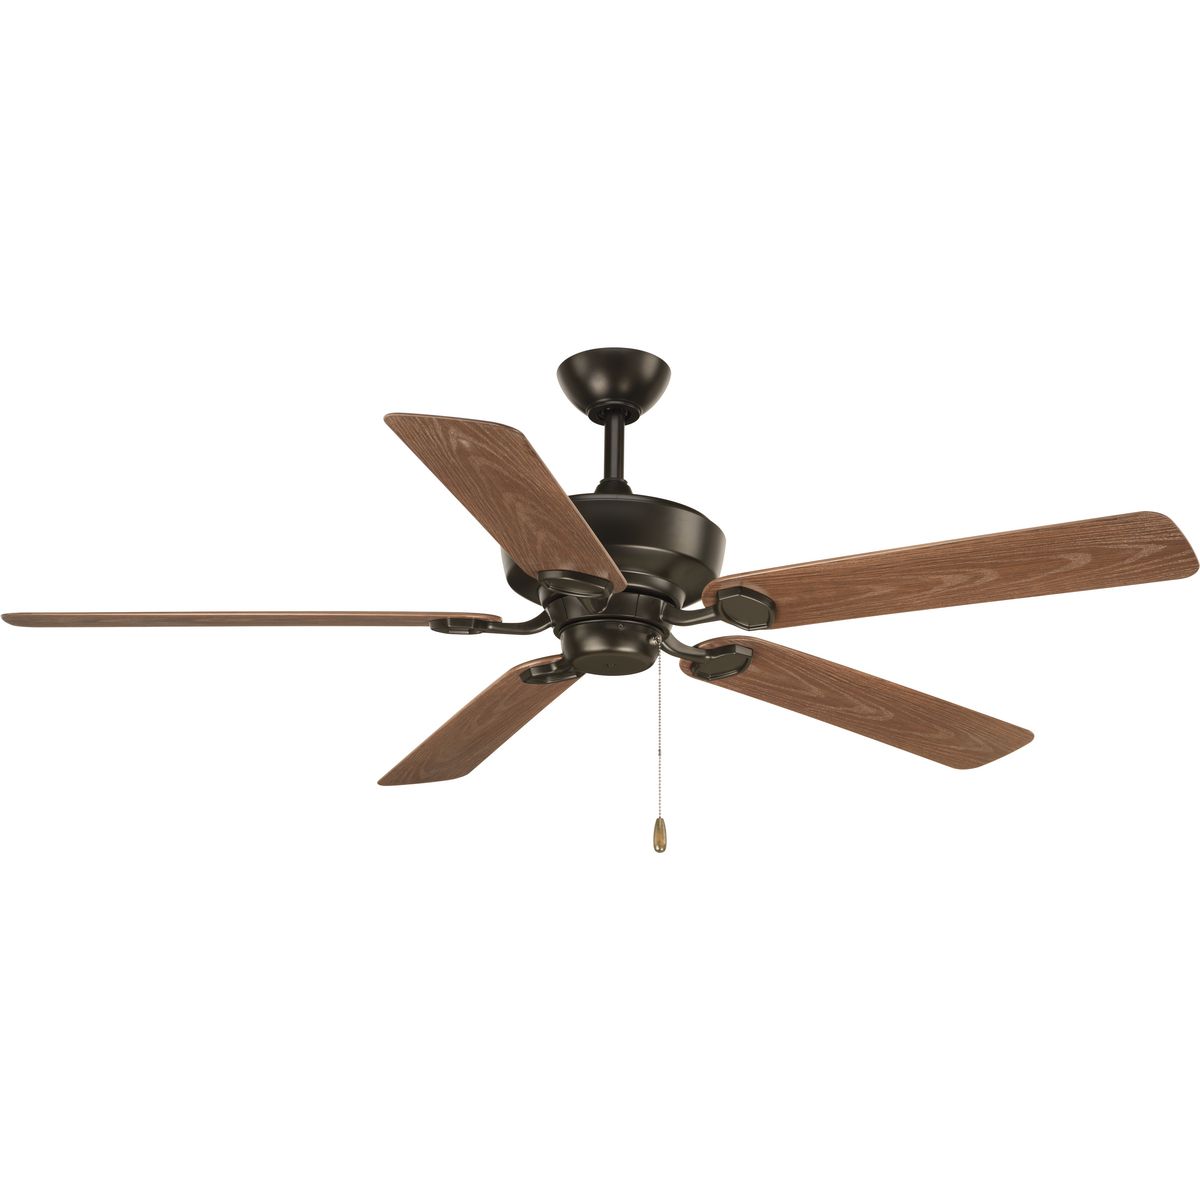 This five-blade 60 in Lakehurst ceiling fan features an all weather wet location rating (ABS) to accommodate a variety of interior and exterior locations. Compatible with universal light kits, Lakehurst features a dual mount system and a three-speed pull chain fan switch. ABS blades. Antique Bronze finish.